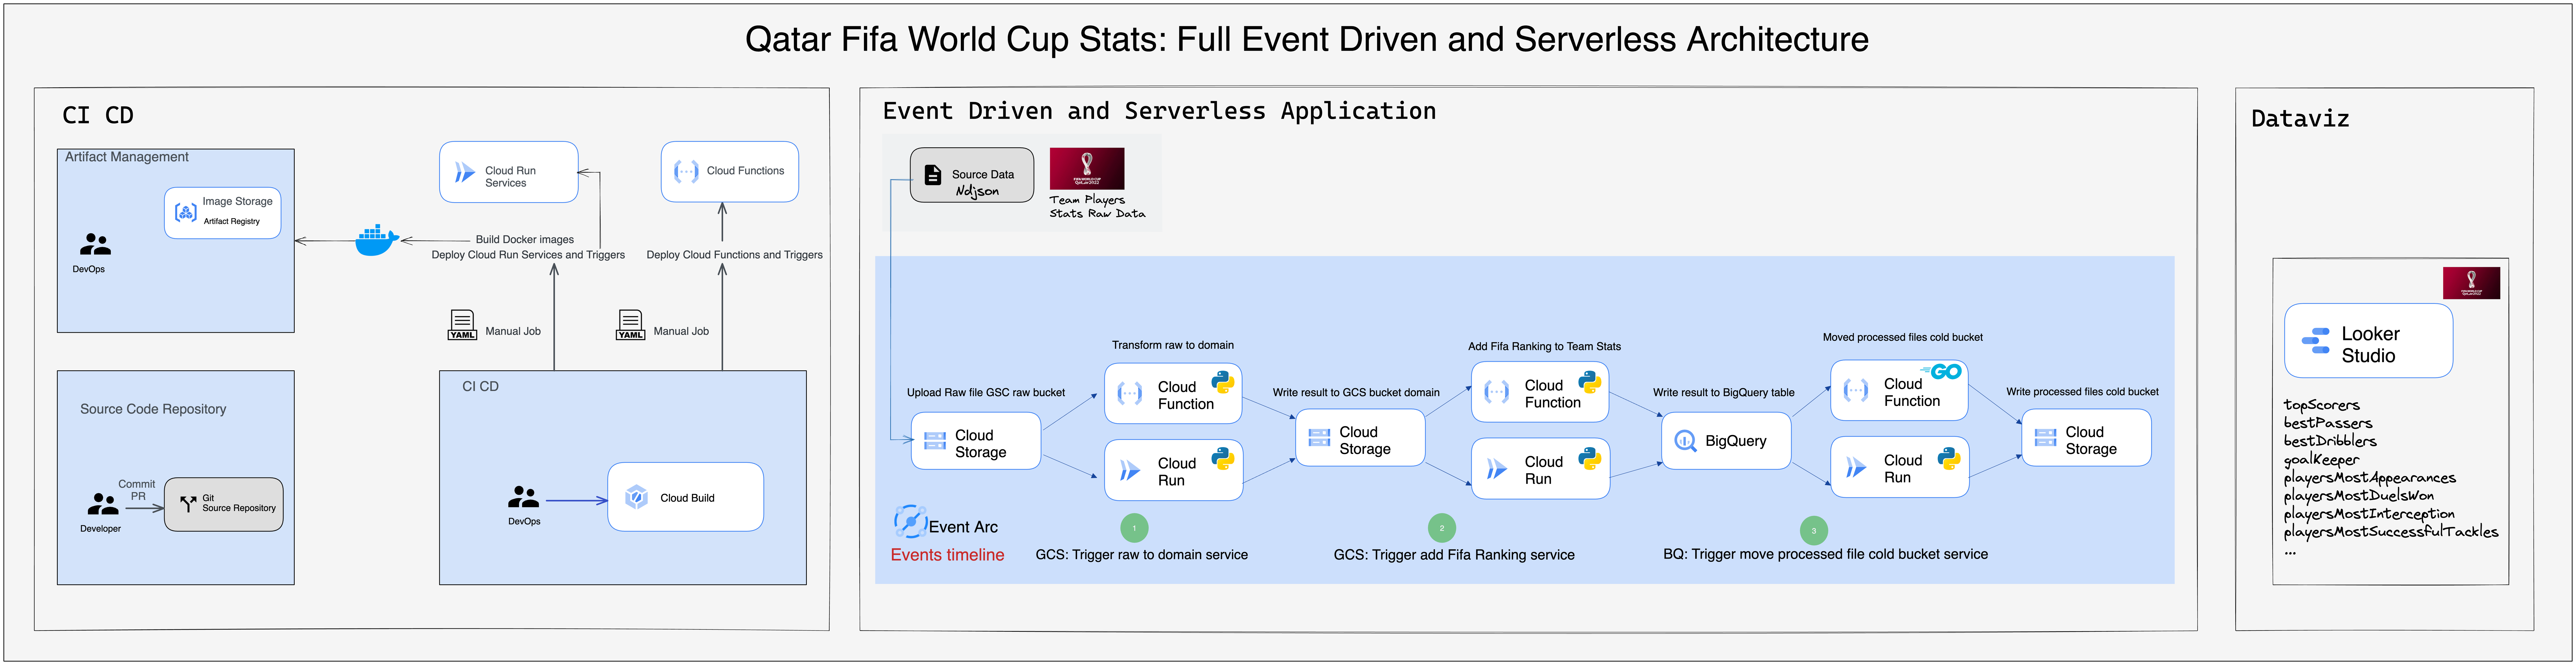 qatar_fifa_world_cup_full_event_driven_and_serverless_archi.png